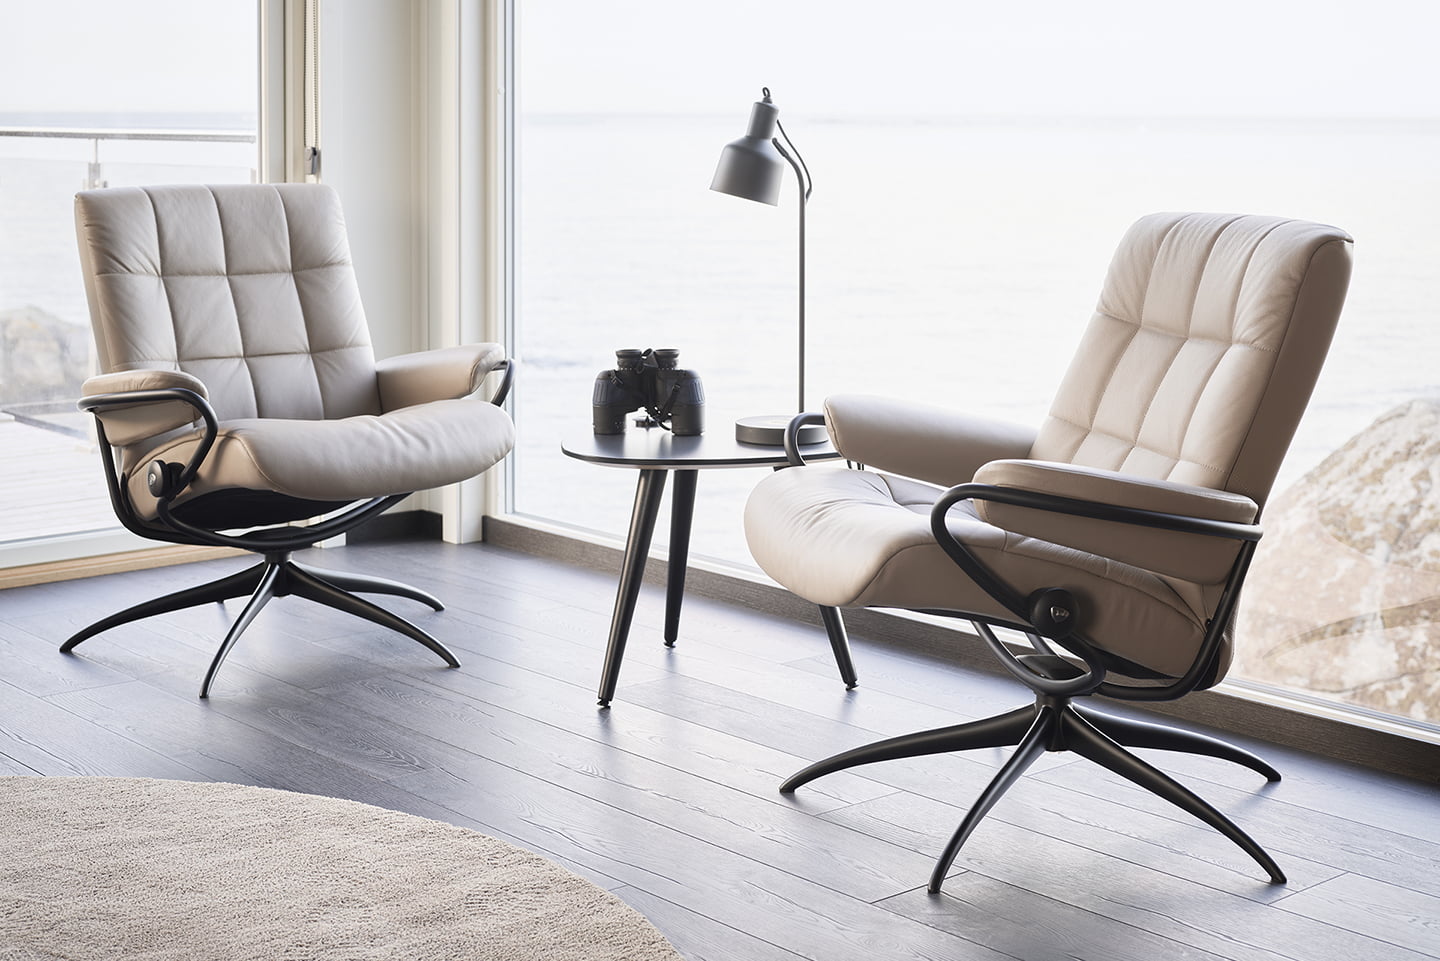 Stressless® London low back recliners at Runde